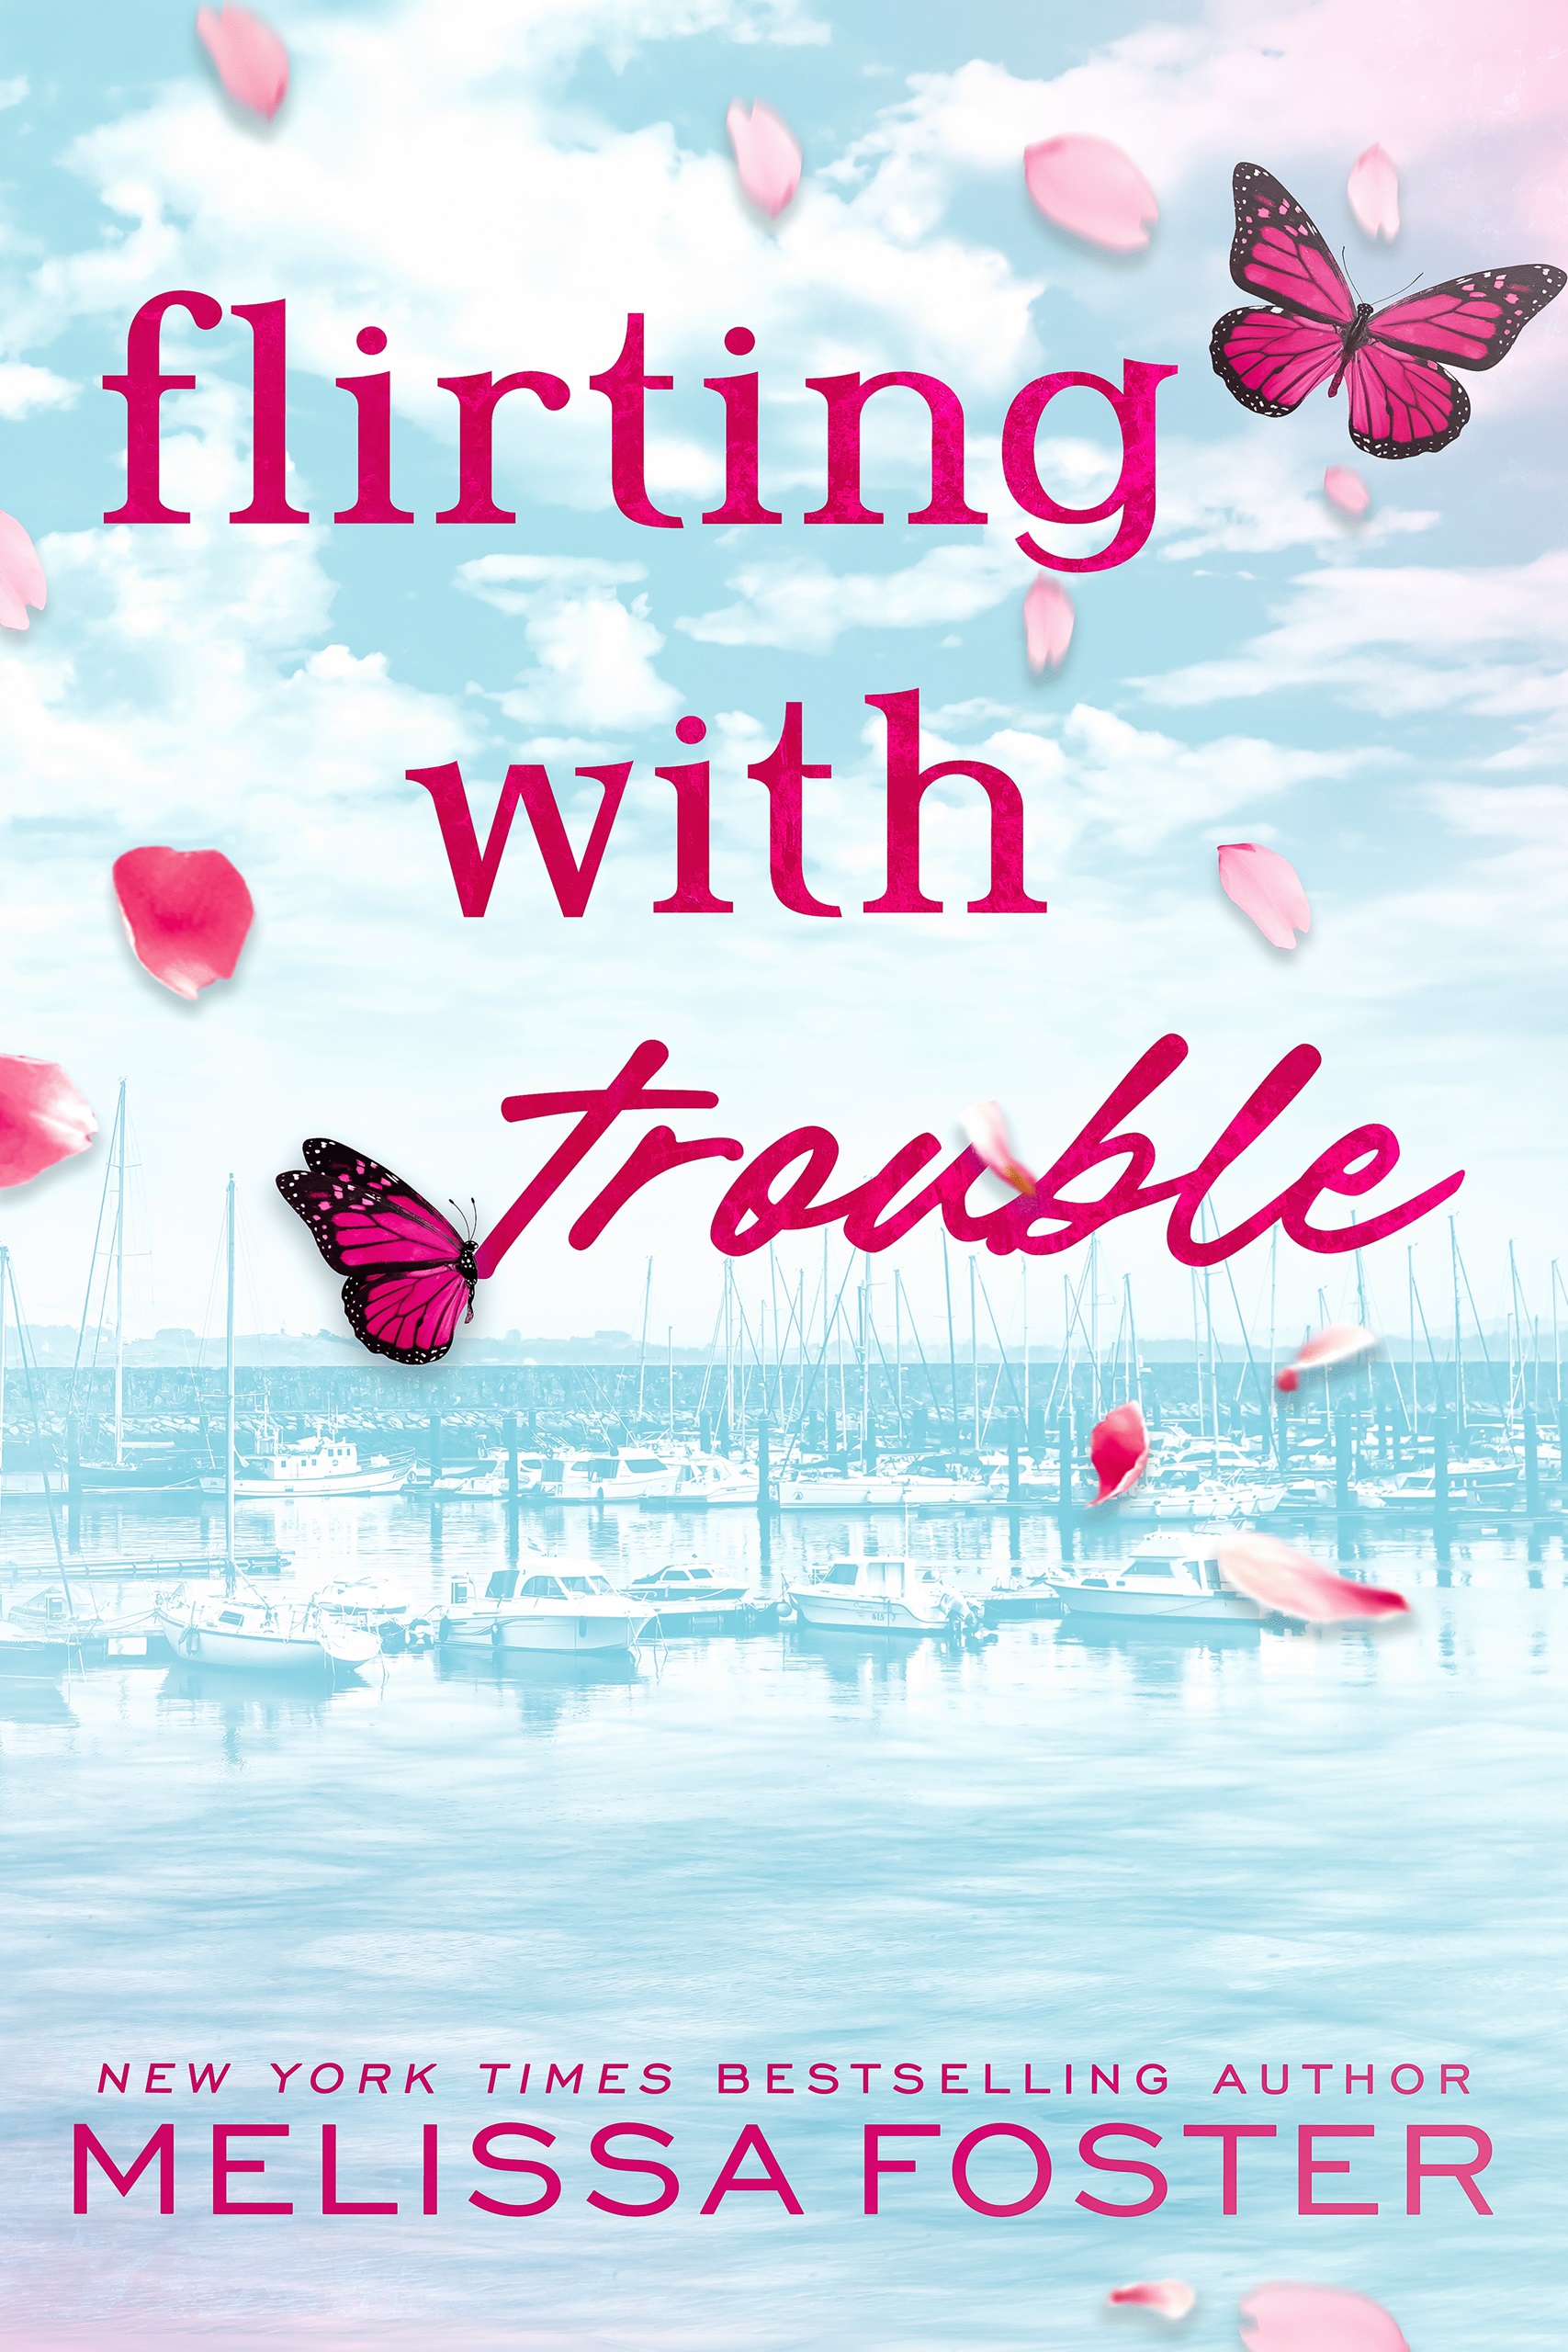 Flirting with Trouble special edition by Melissa Foster